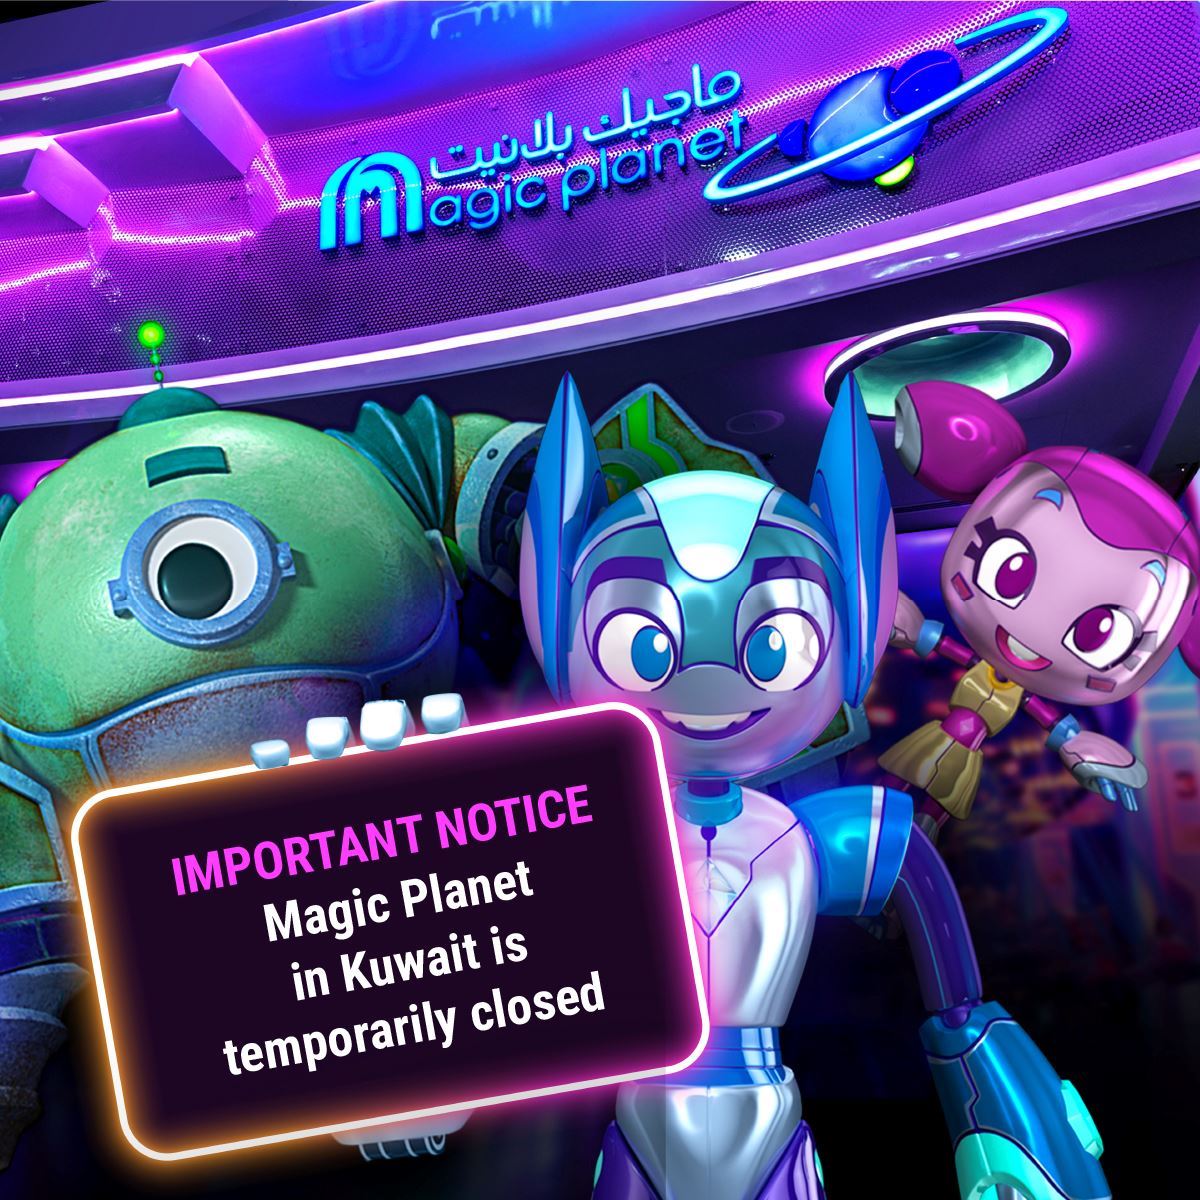 Magic Planet in The Avenues Kuwait is temporarily closed for maintenance